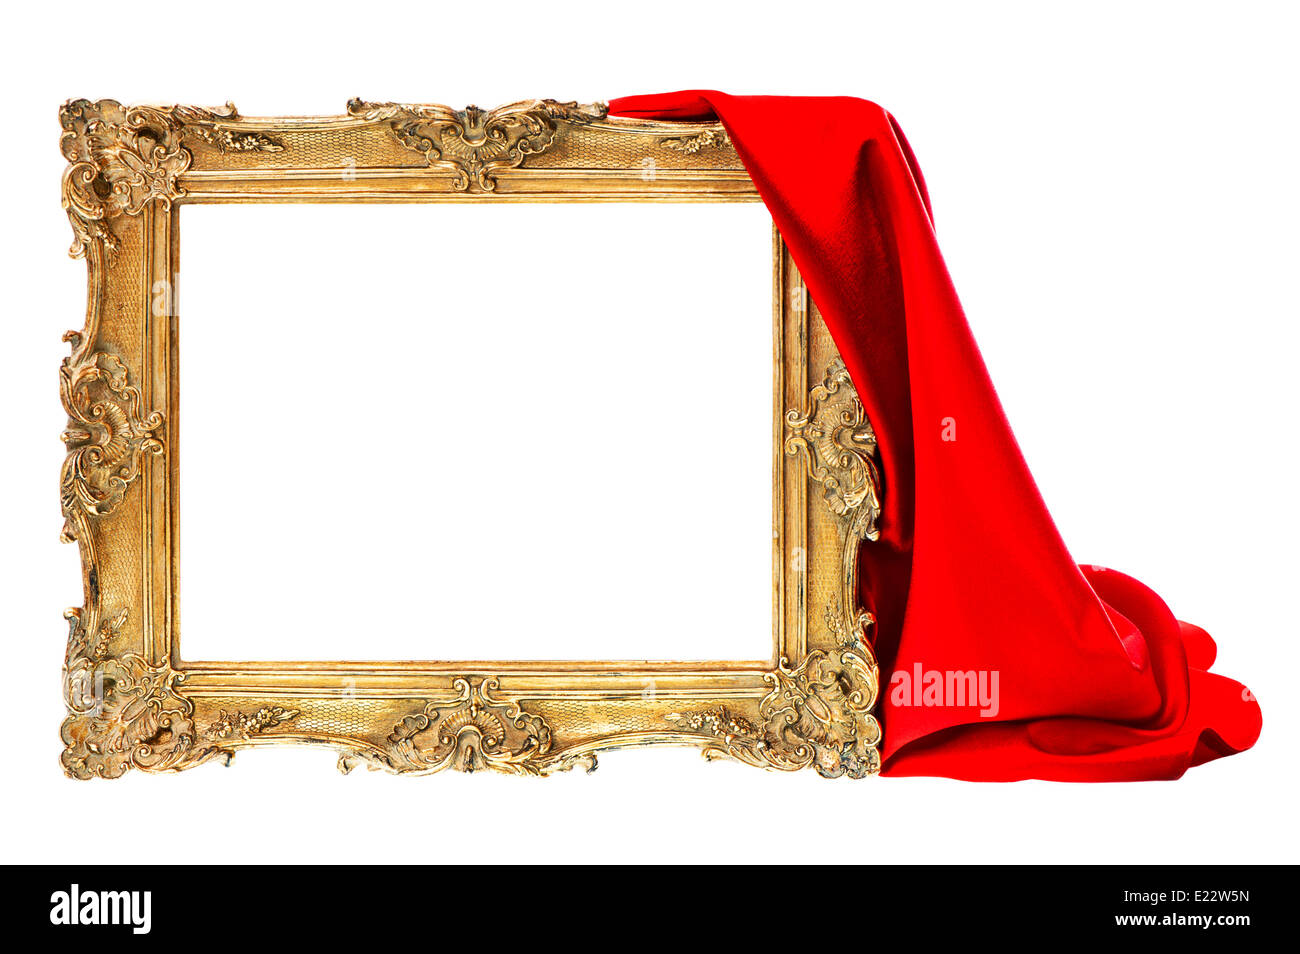 baroque golden frame with red silk decoration isolated on white background Stock Photo